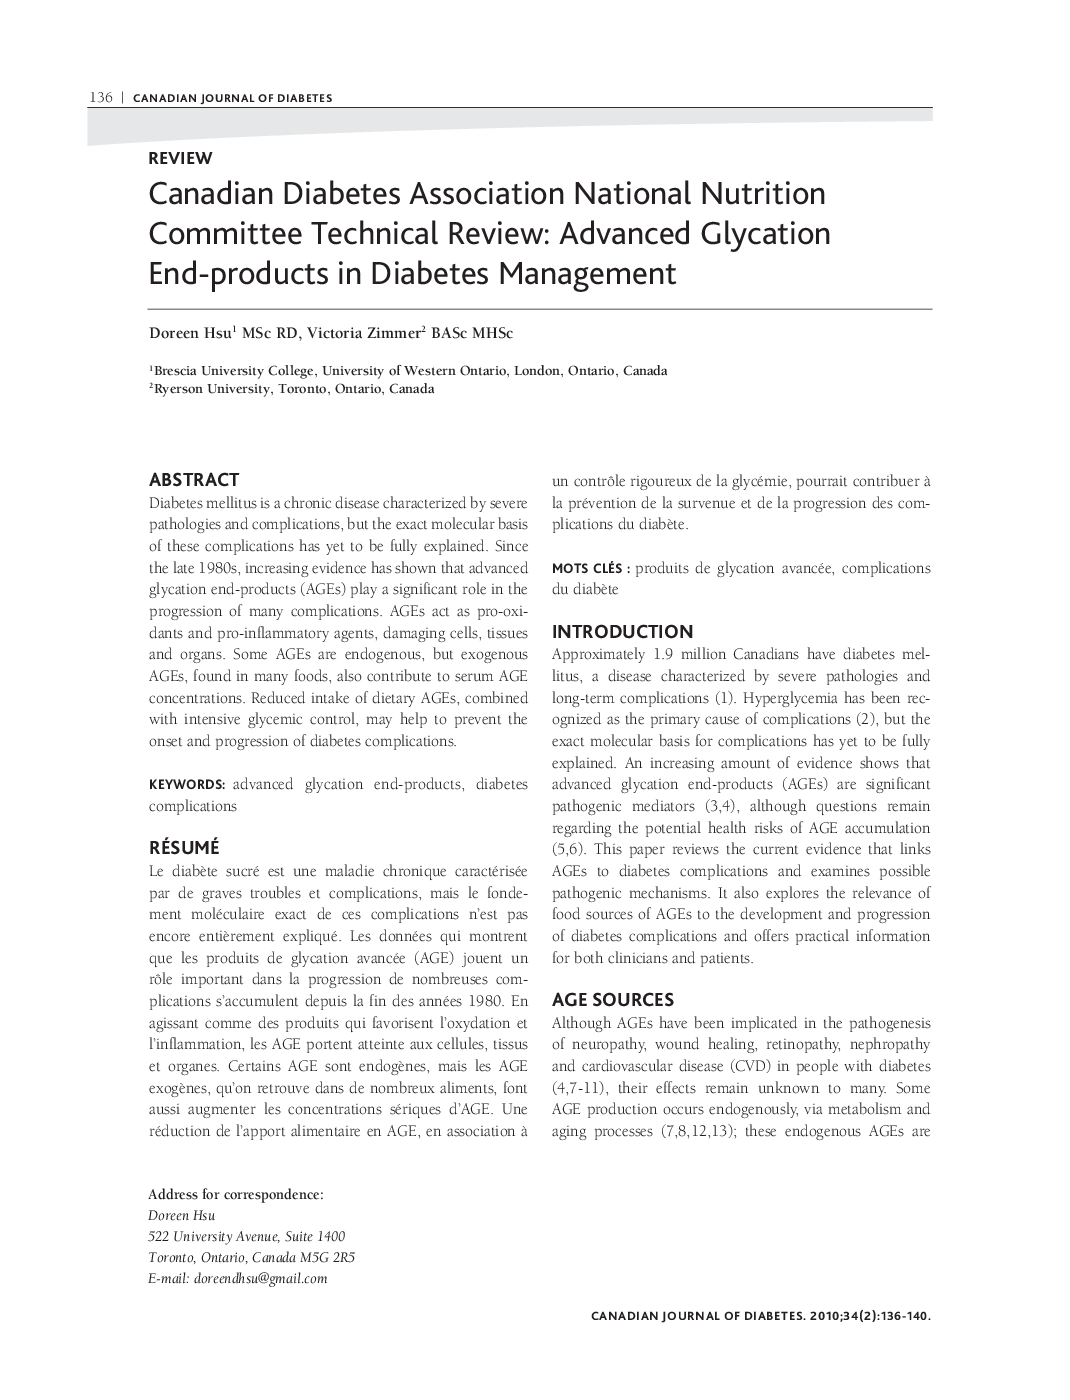 Canadian Diabetes Association National Nutrition Committee Technical Review: Advanced Glycation End-products in Diabetes Management